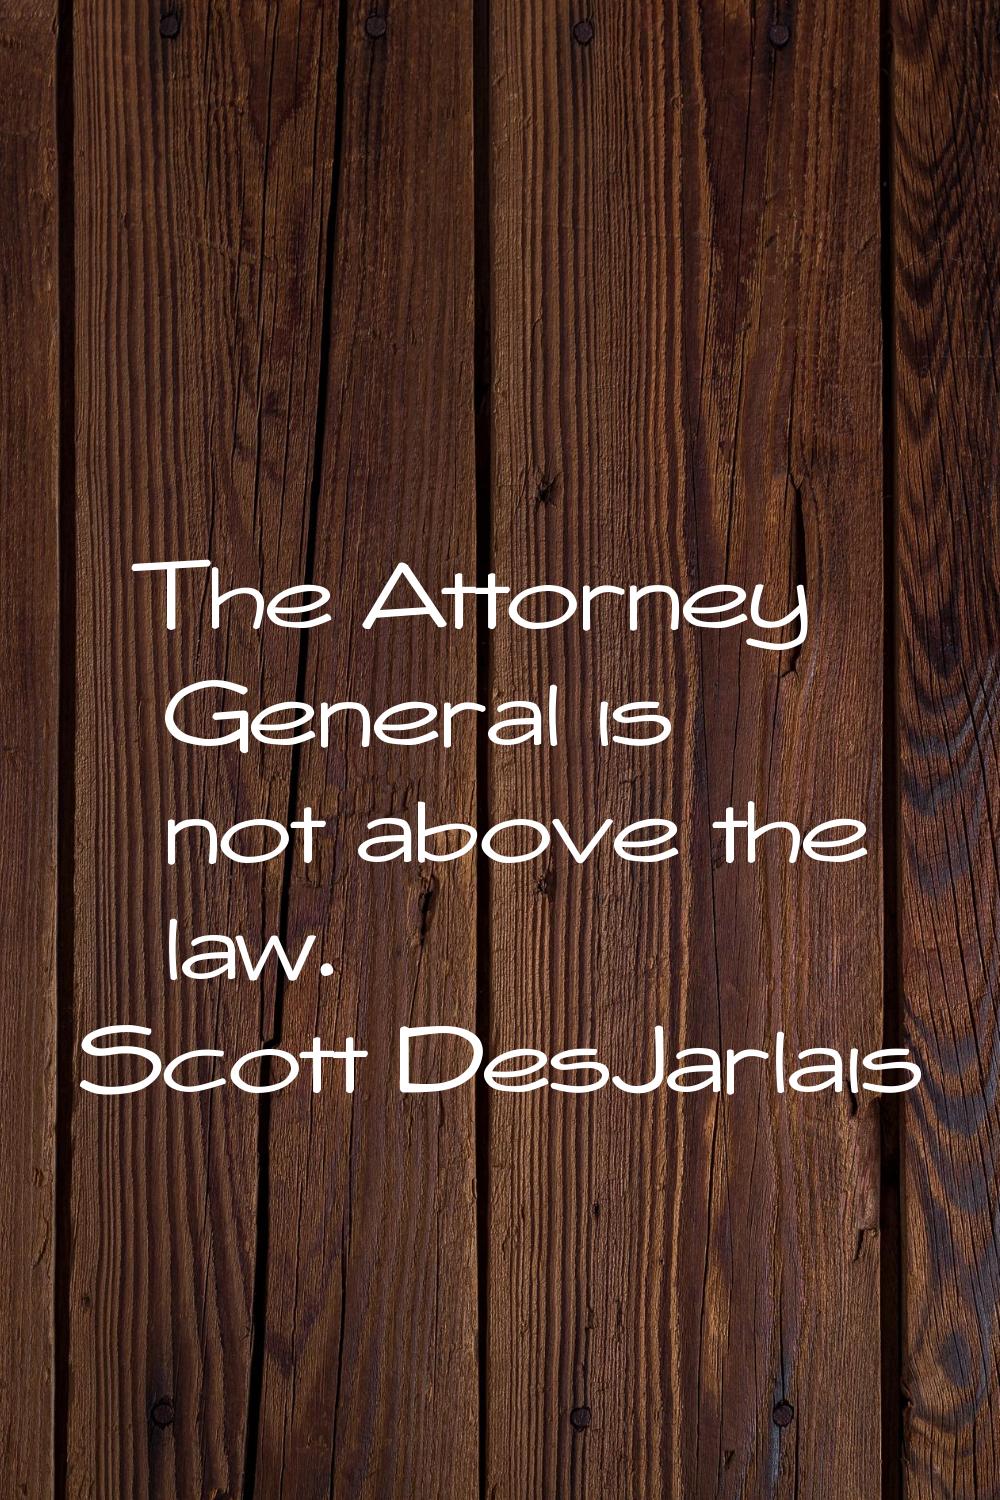 The Attorney General is not above the law.